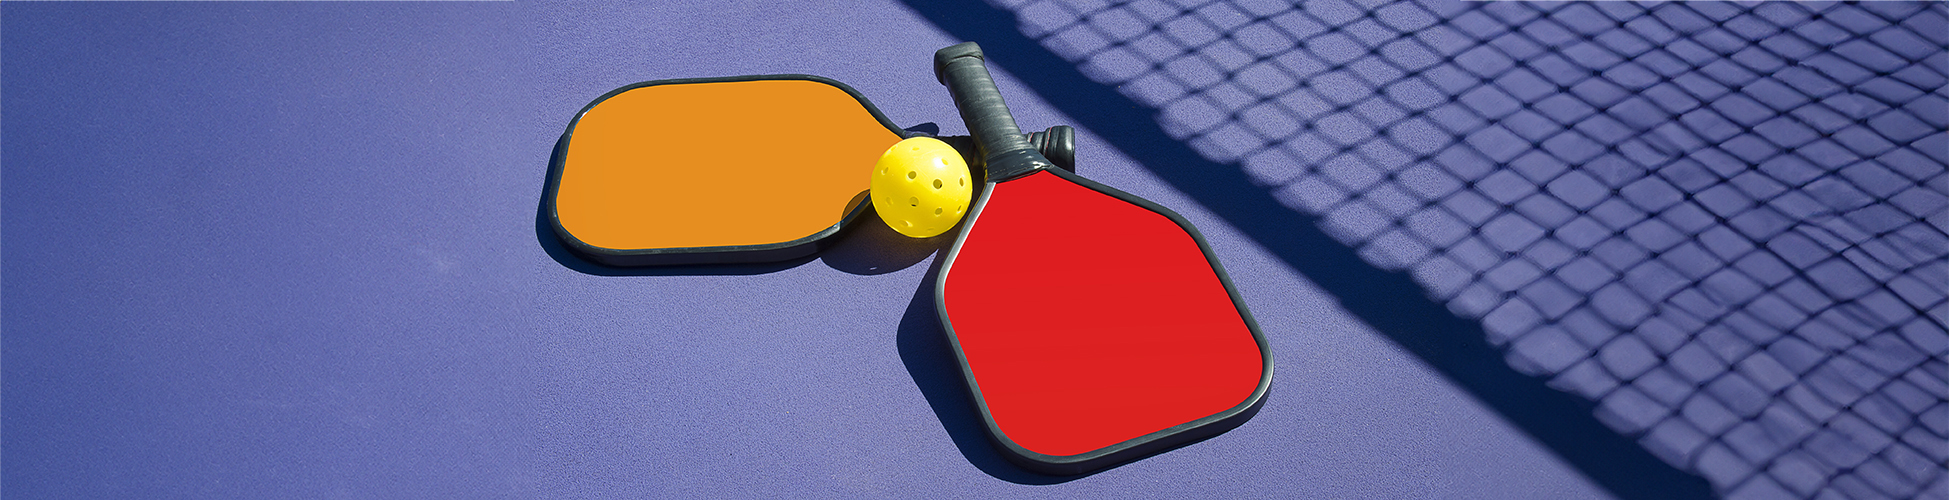 pickleball paddles near the shadow of netting